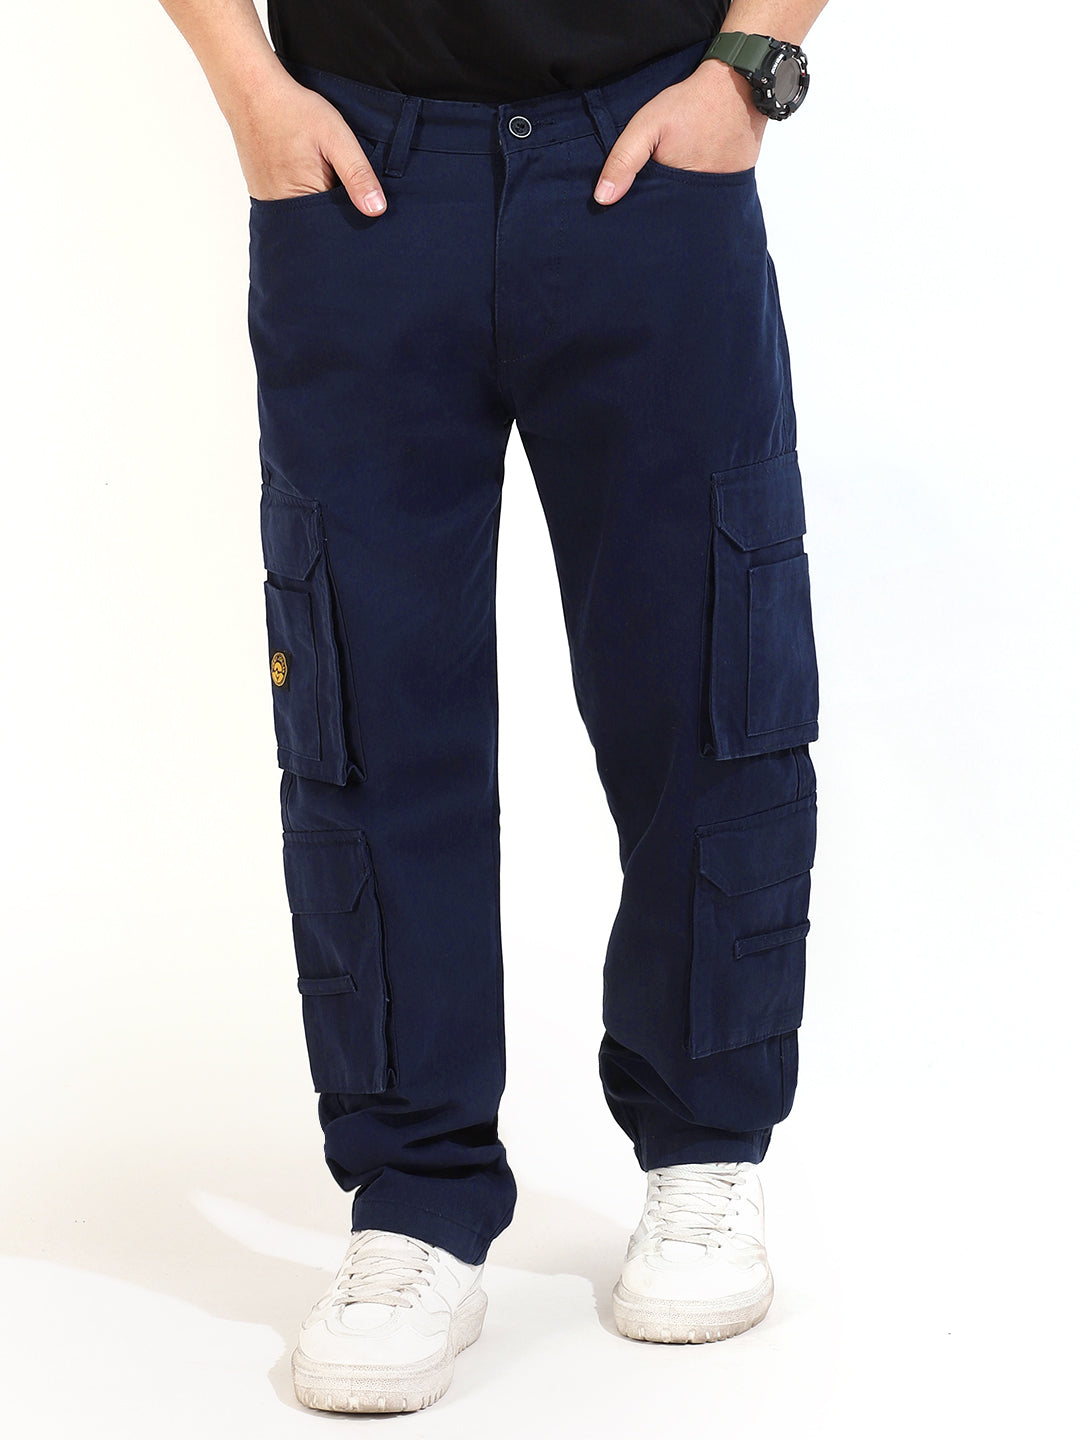 Navy Cotton Drill 8 pocket Baggy Fit Cargo